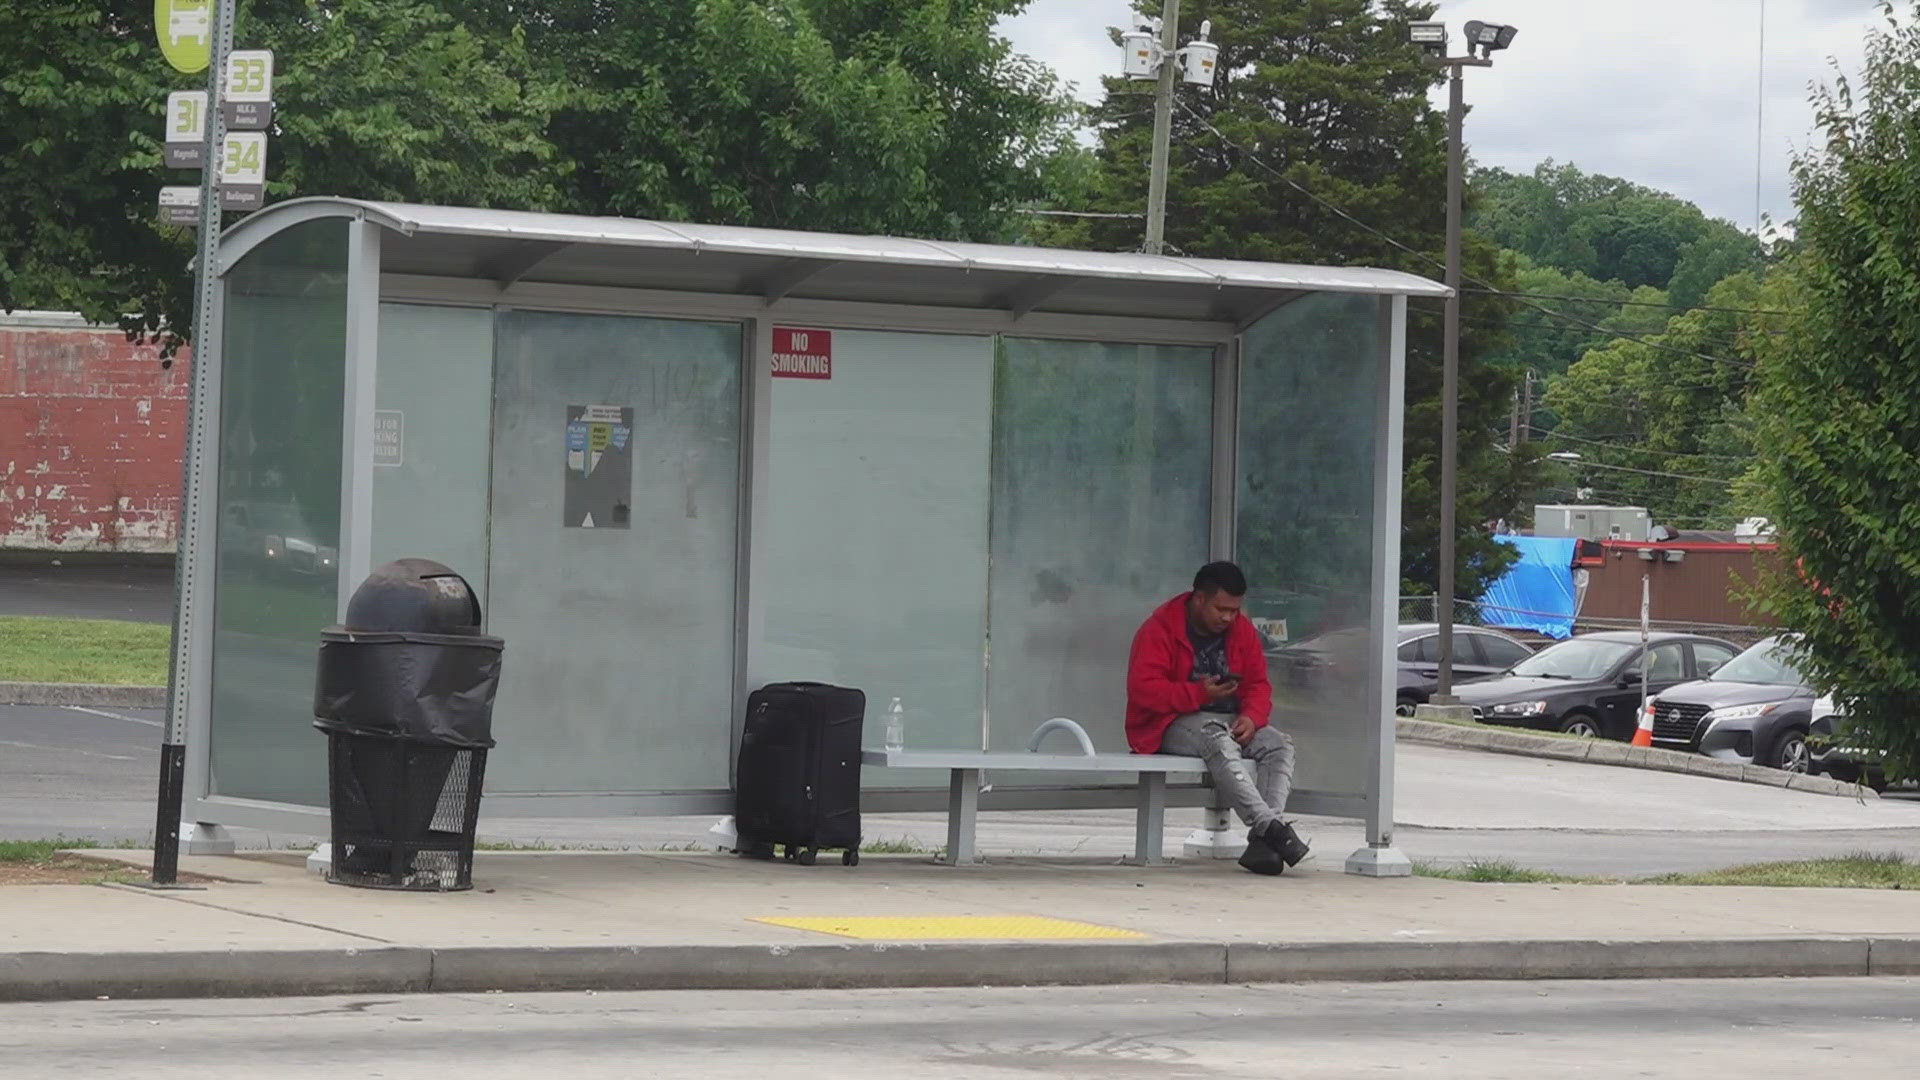 The Greyhound bus stop is located near a KAT bus stop — offering only a small shelter and a bench.